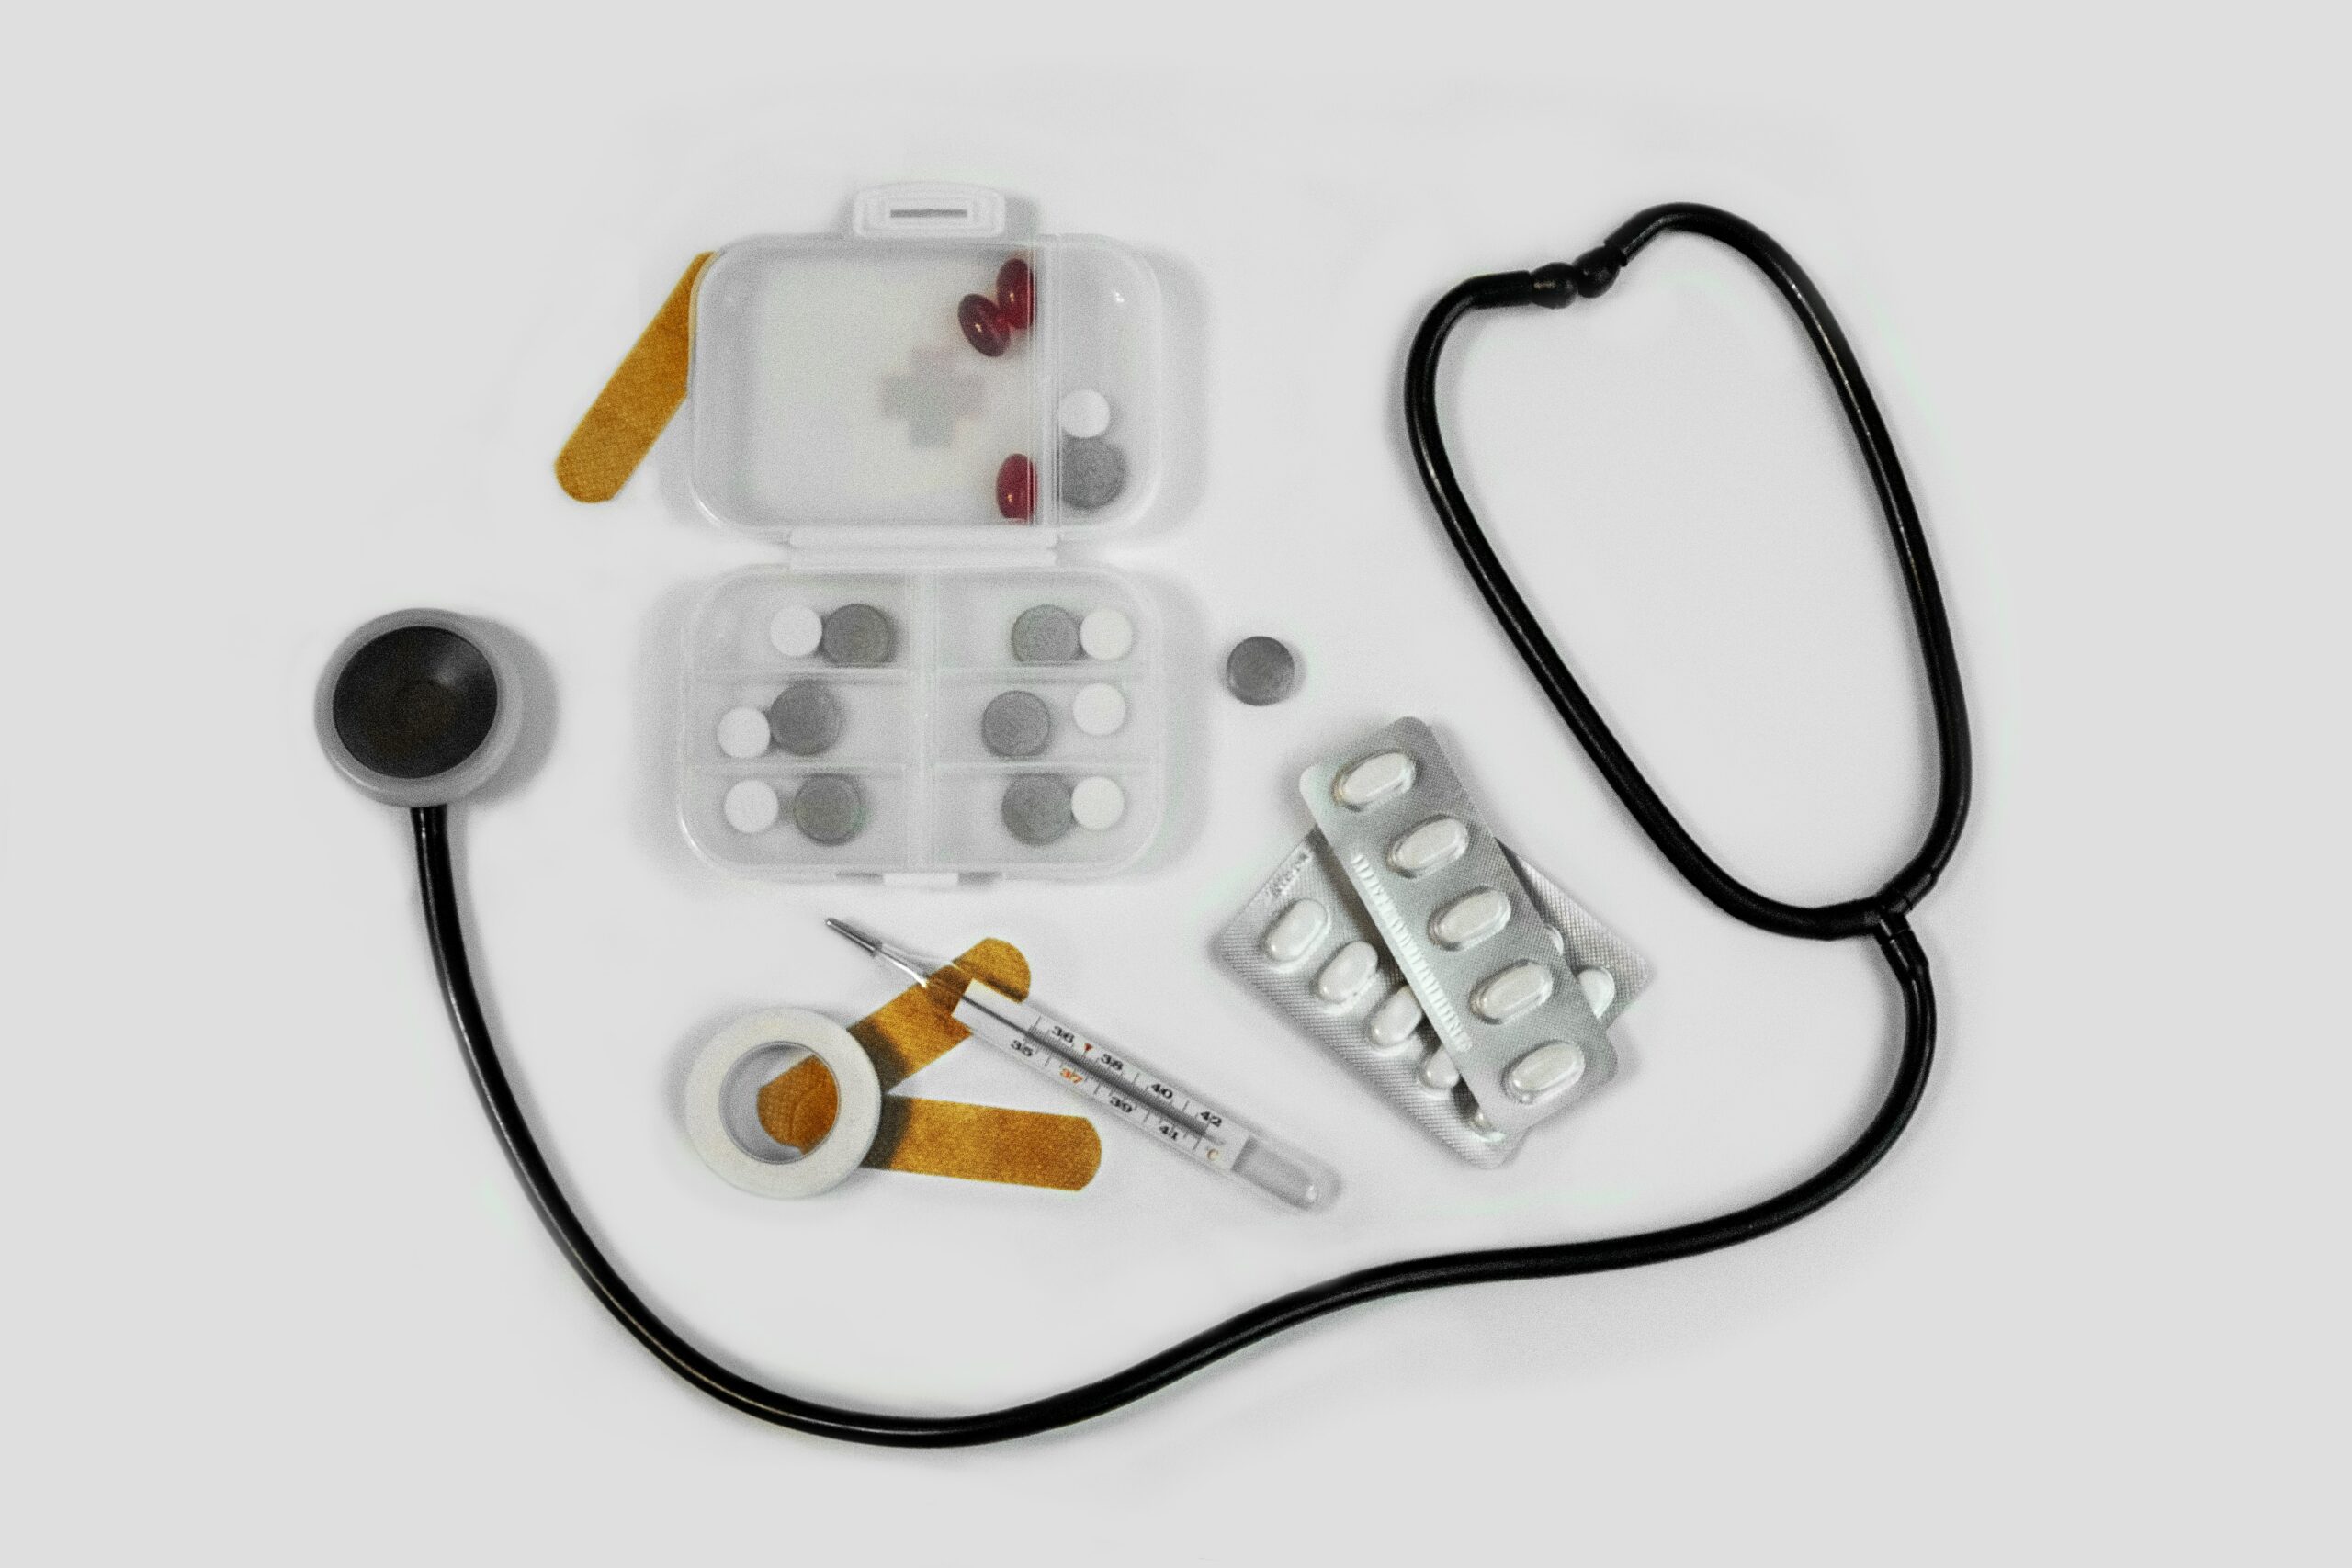 overhead shot of a stethoscope, medications, and syringe.